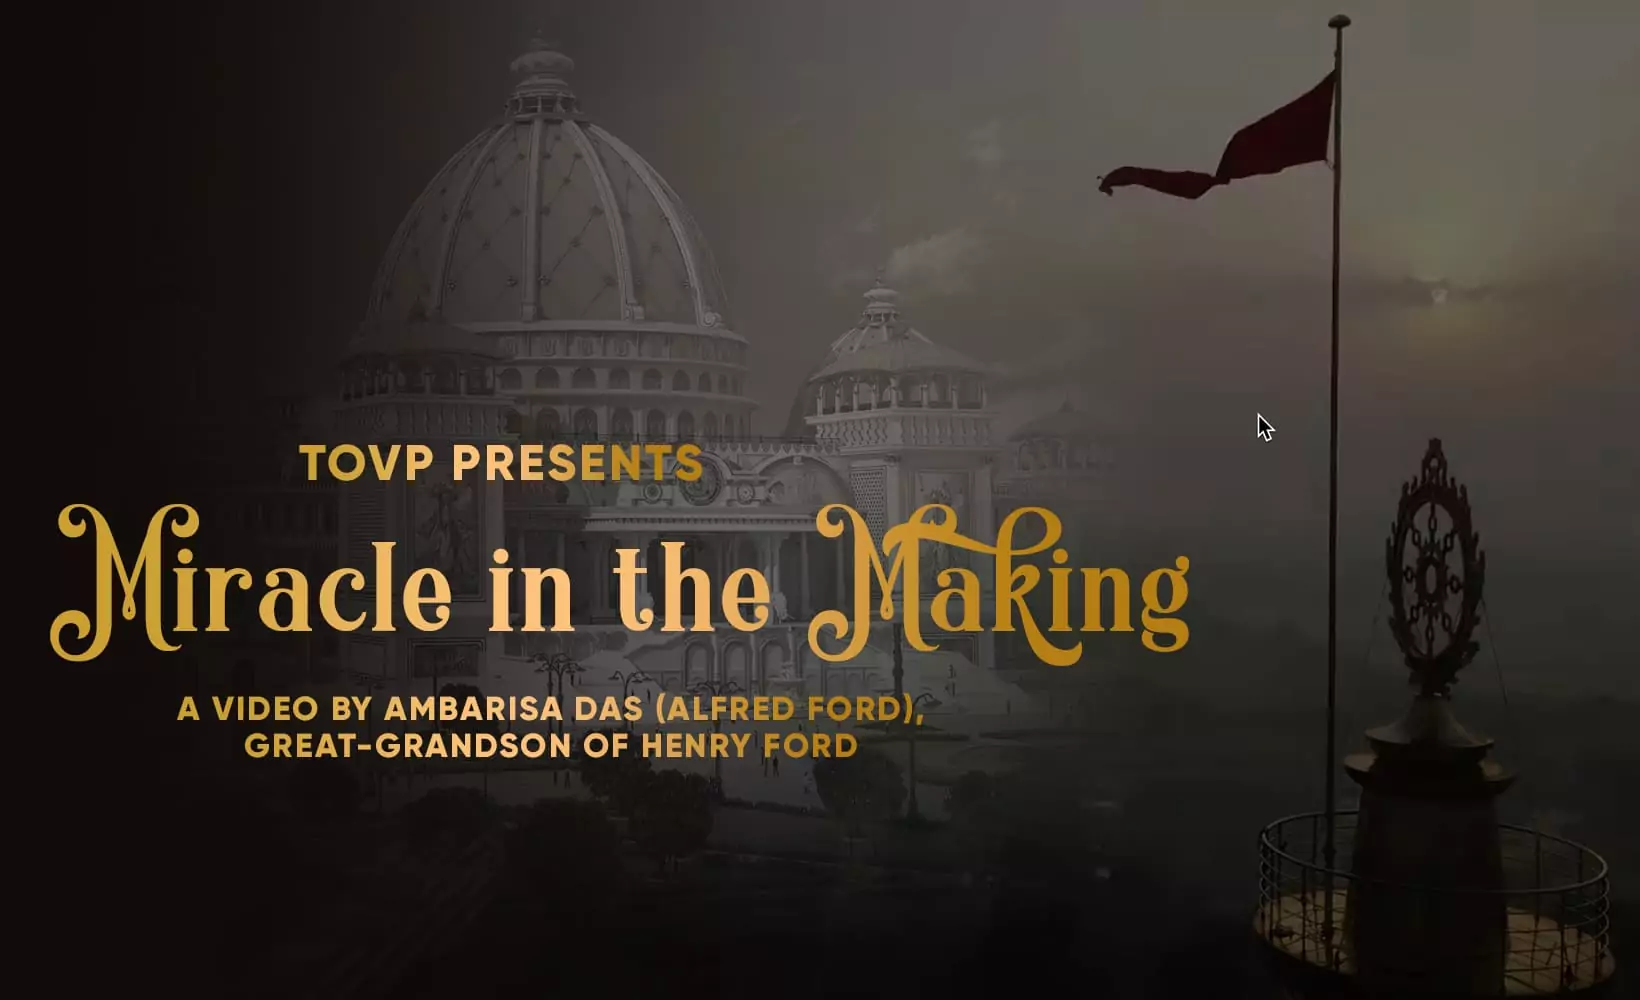 TOVP Presents - Miracle in the Making: Um Vídeo de Ambarisa Das (Alfred Ford), bisneto de Henry Ford